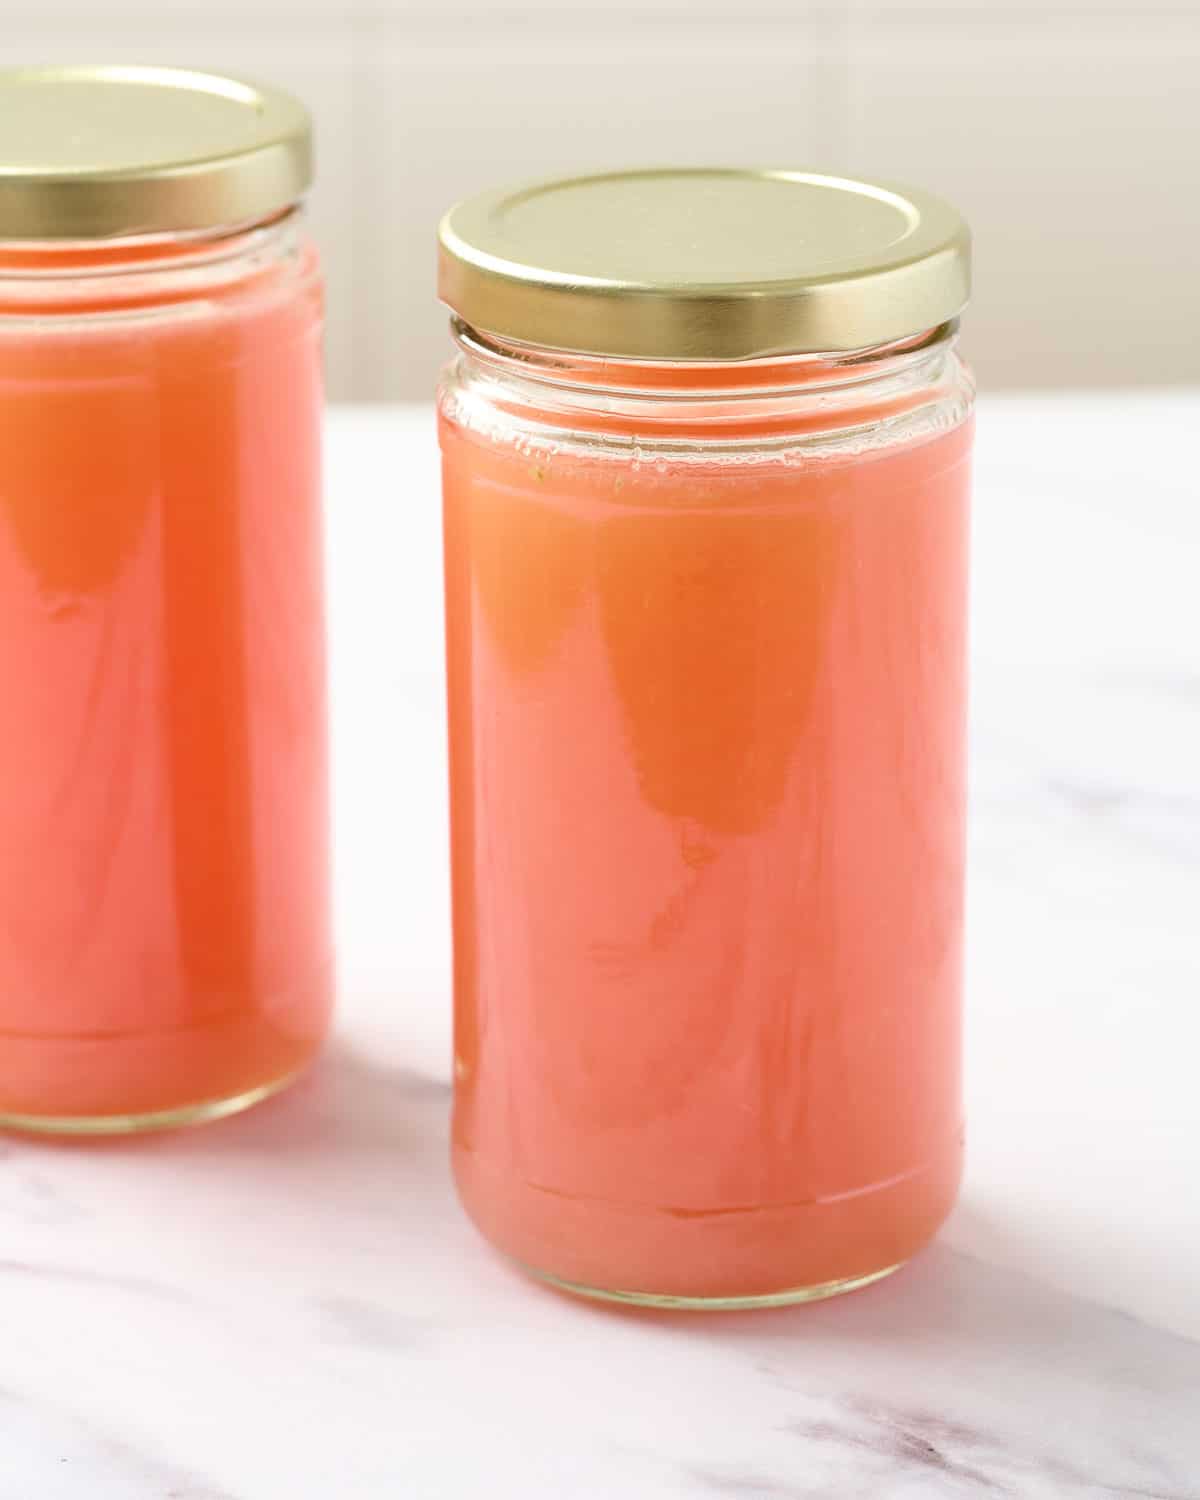 Fresh squeezed grapefruit juice in a glass container.